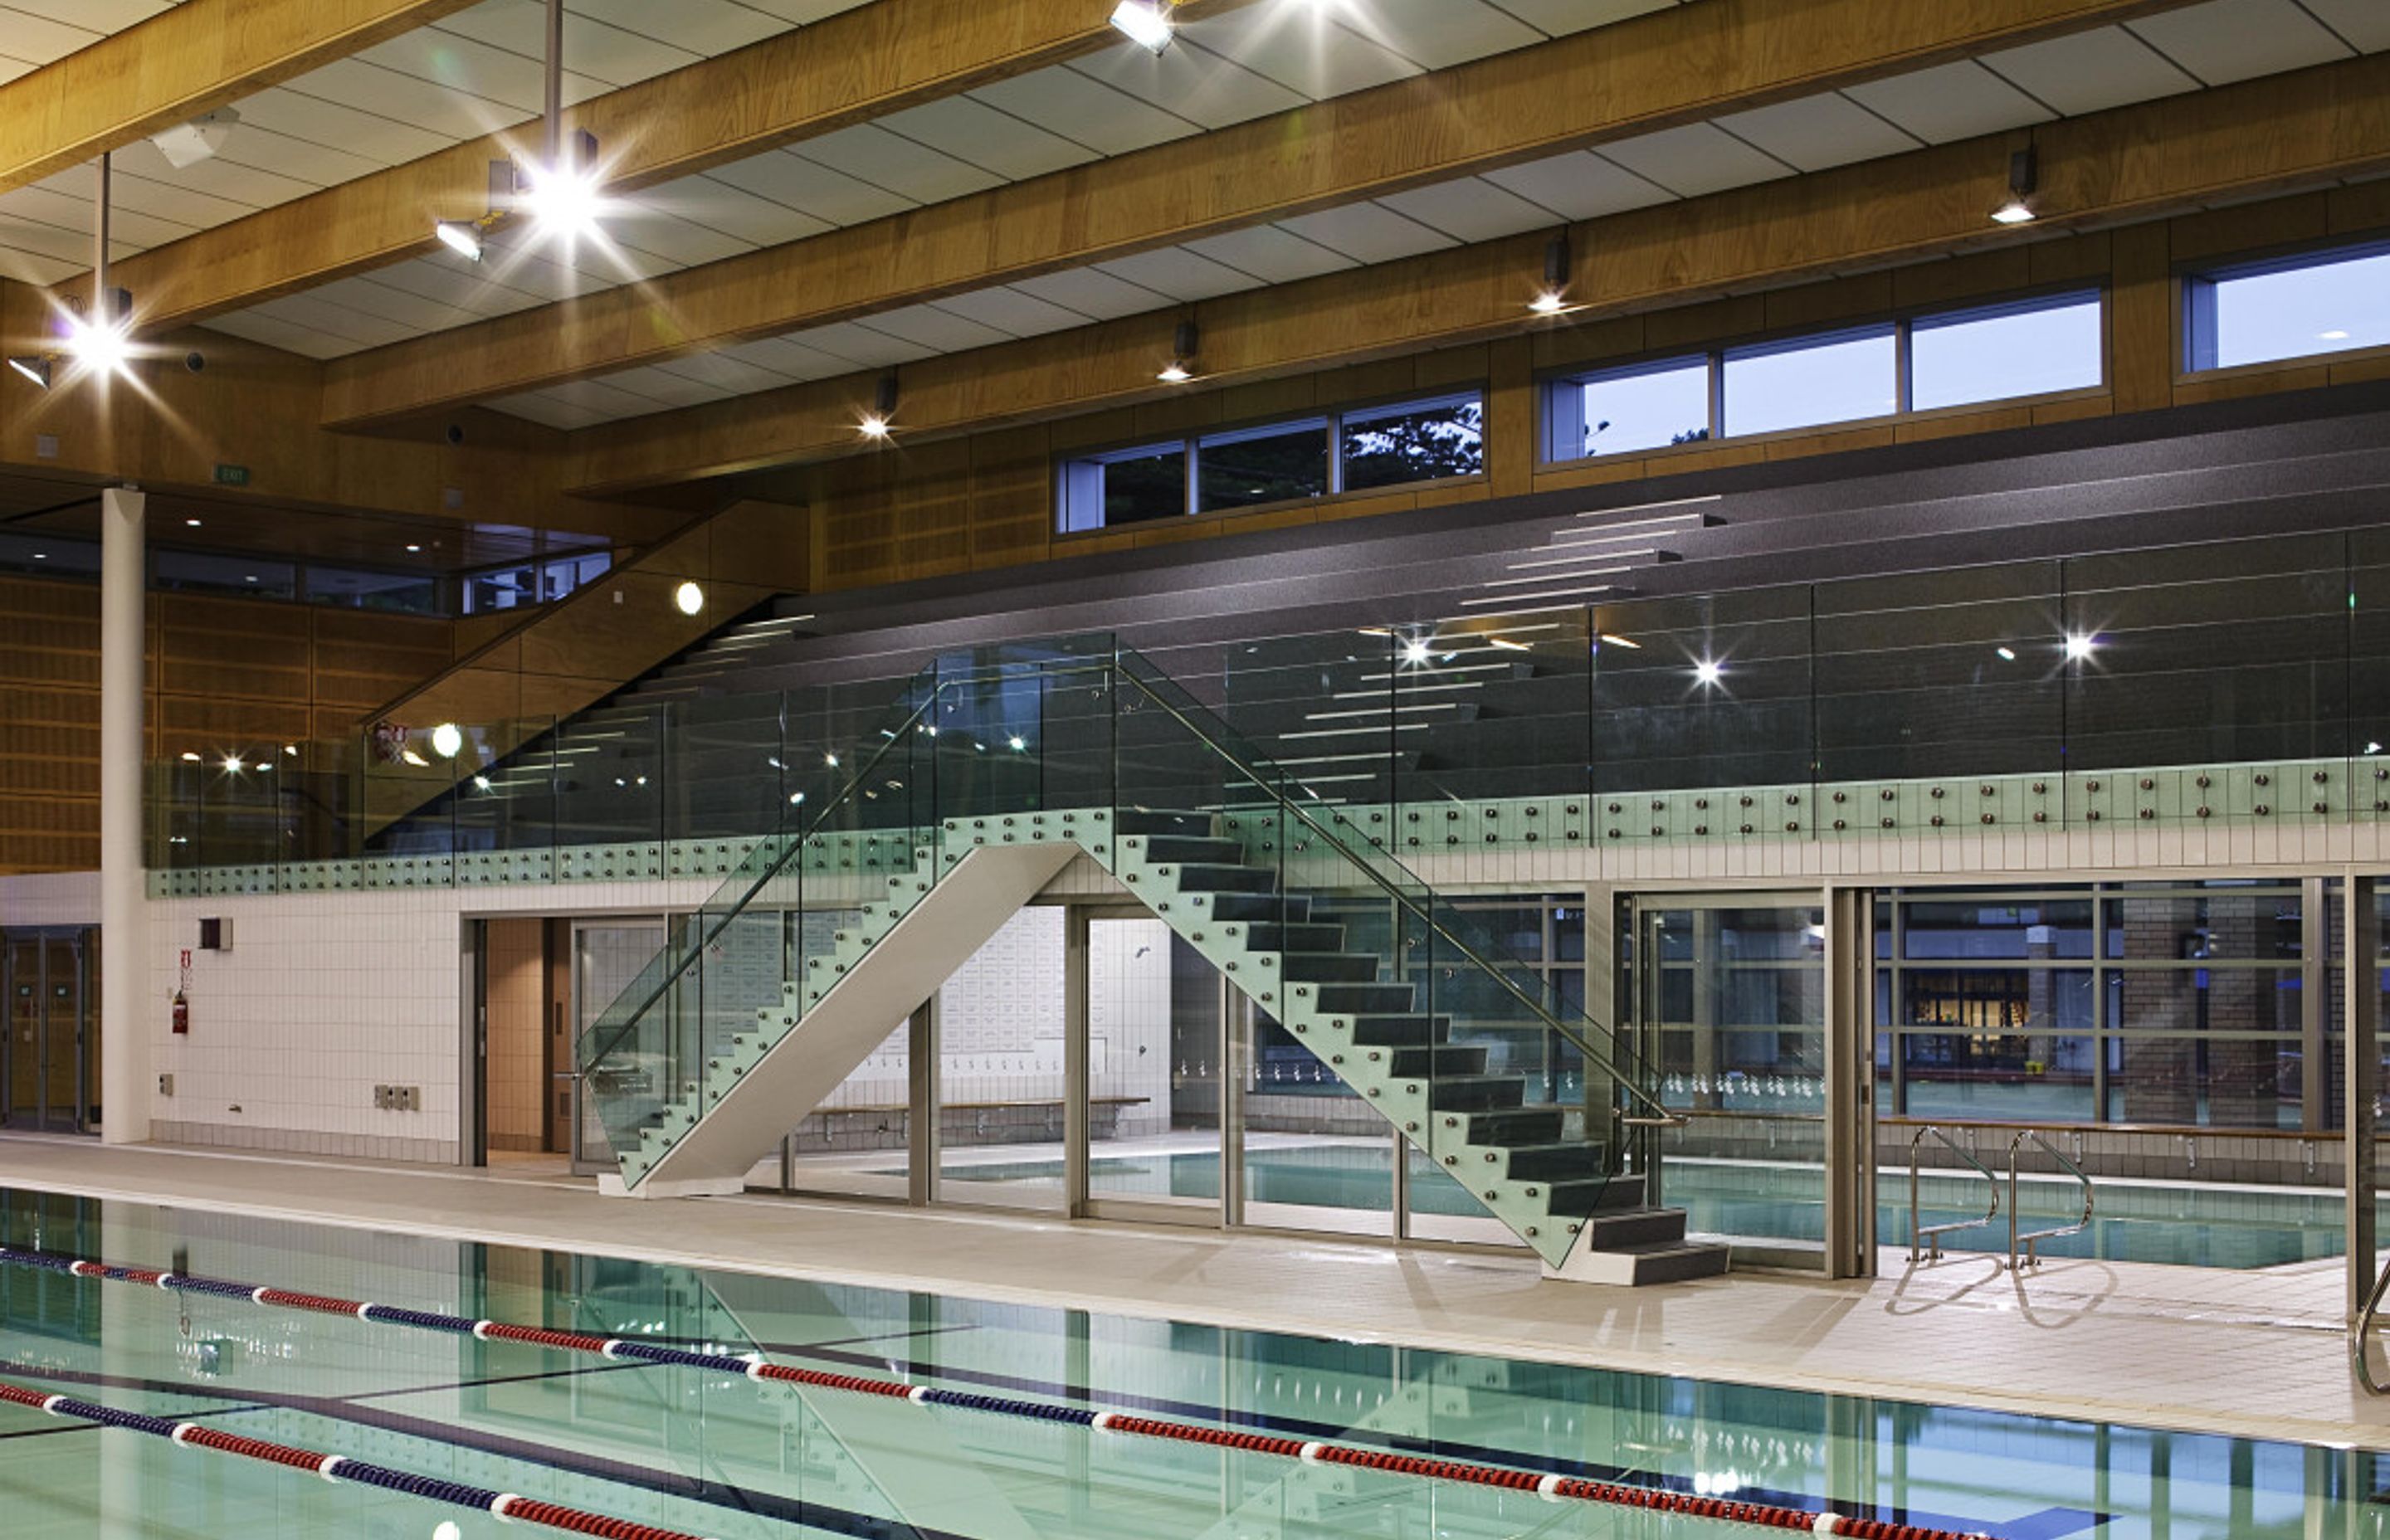 Designing In The Deep End: Diocesan Aquatic Centre